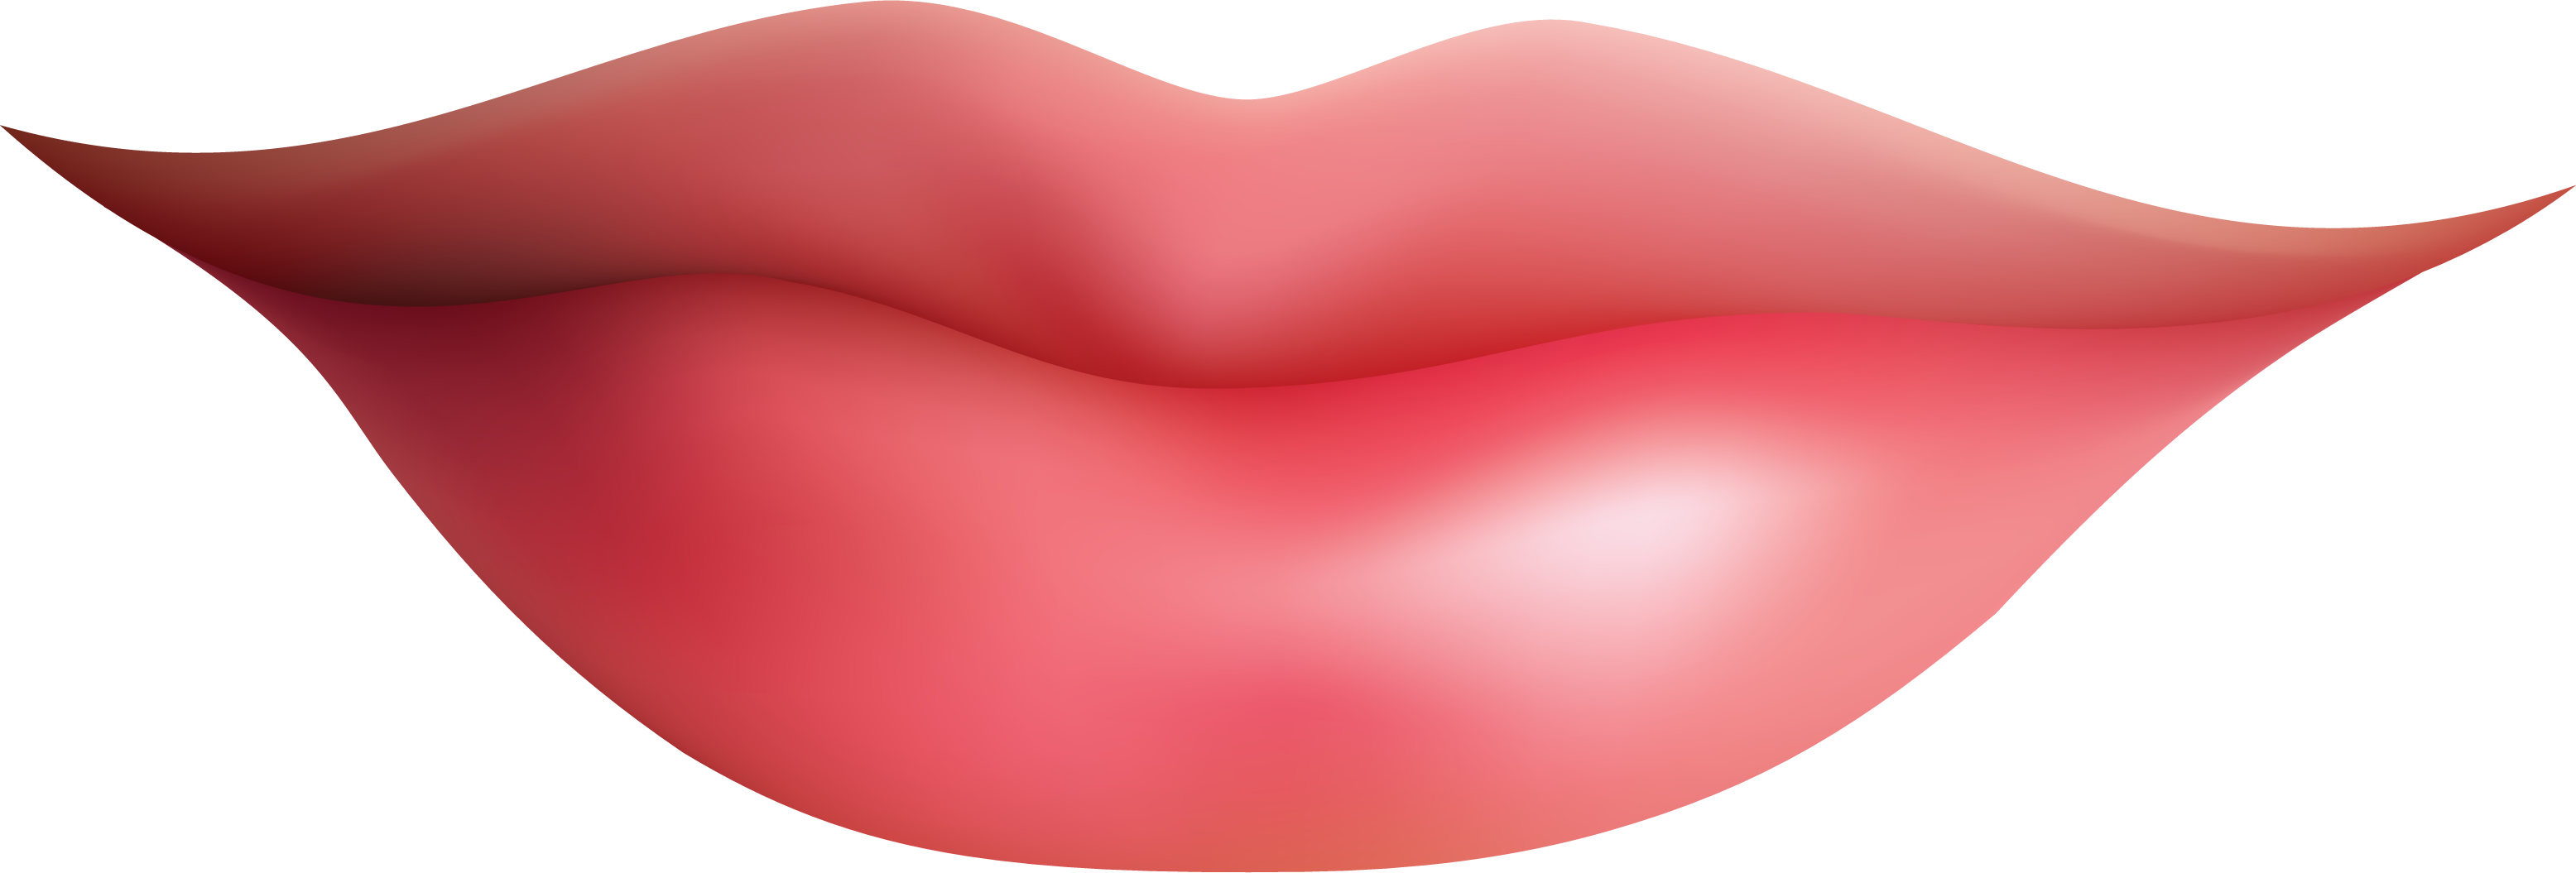 Free Pink Lips Png, Download Free Pink Lips Png png images, Free ...